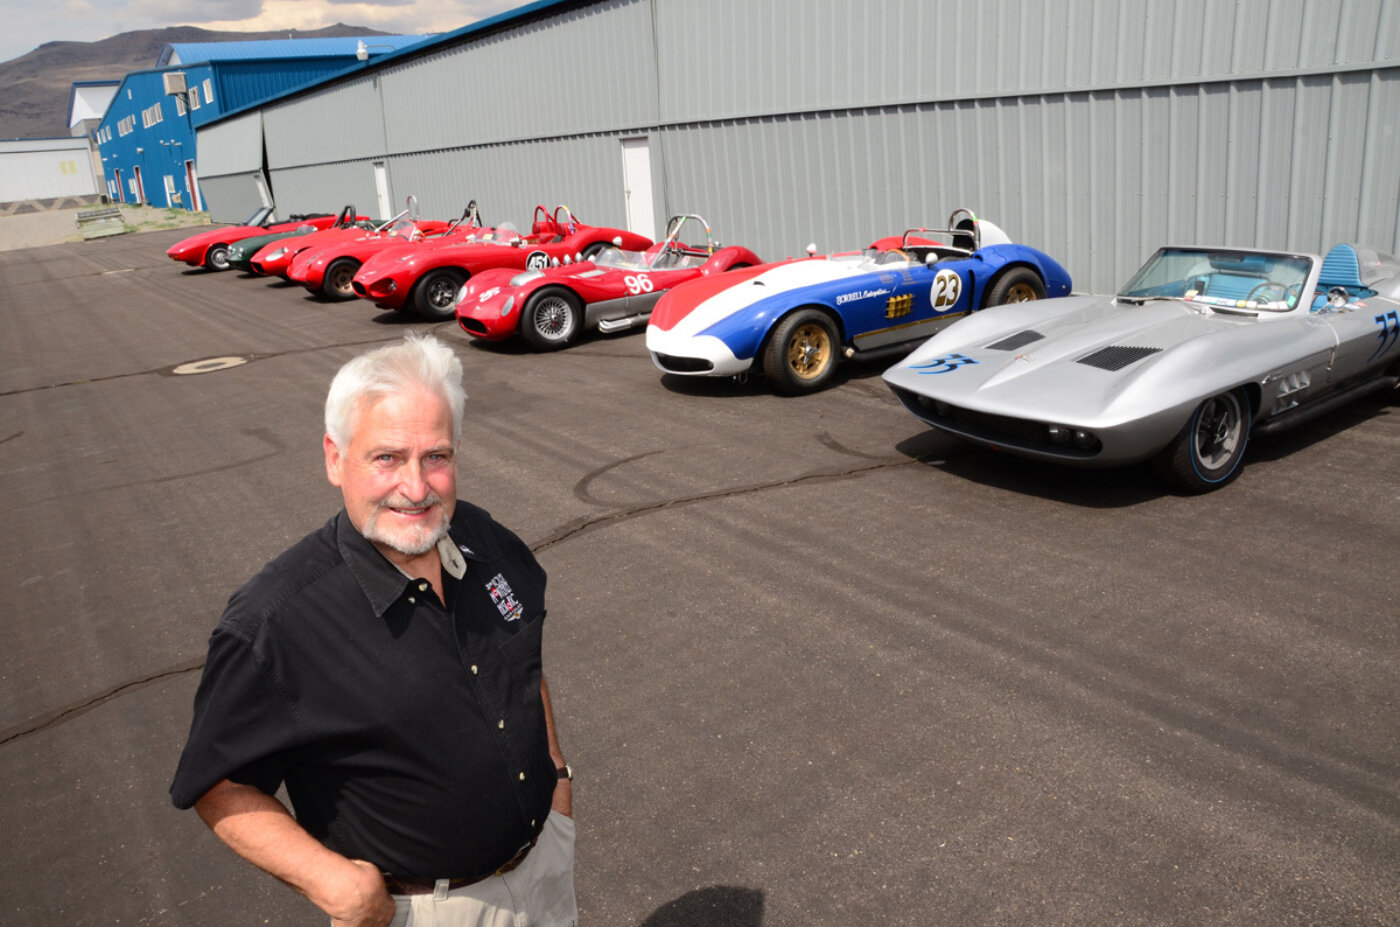 						Wes Abendroth Speacialty Car Collection 1
			